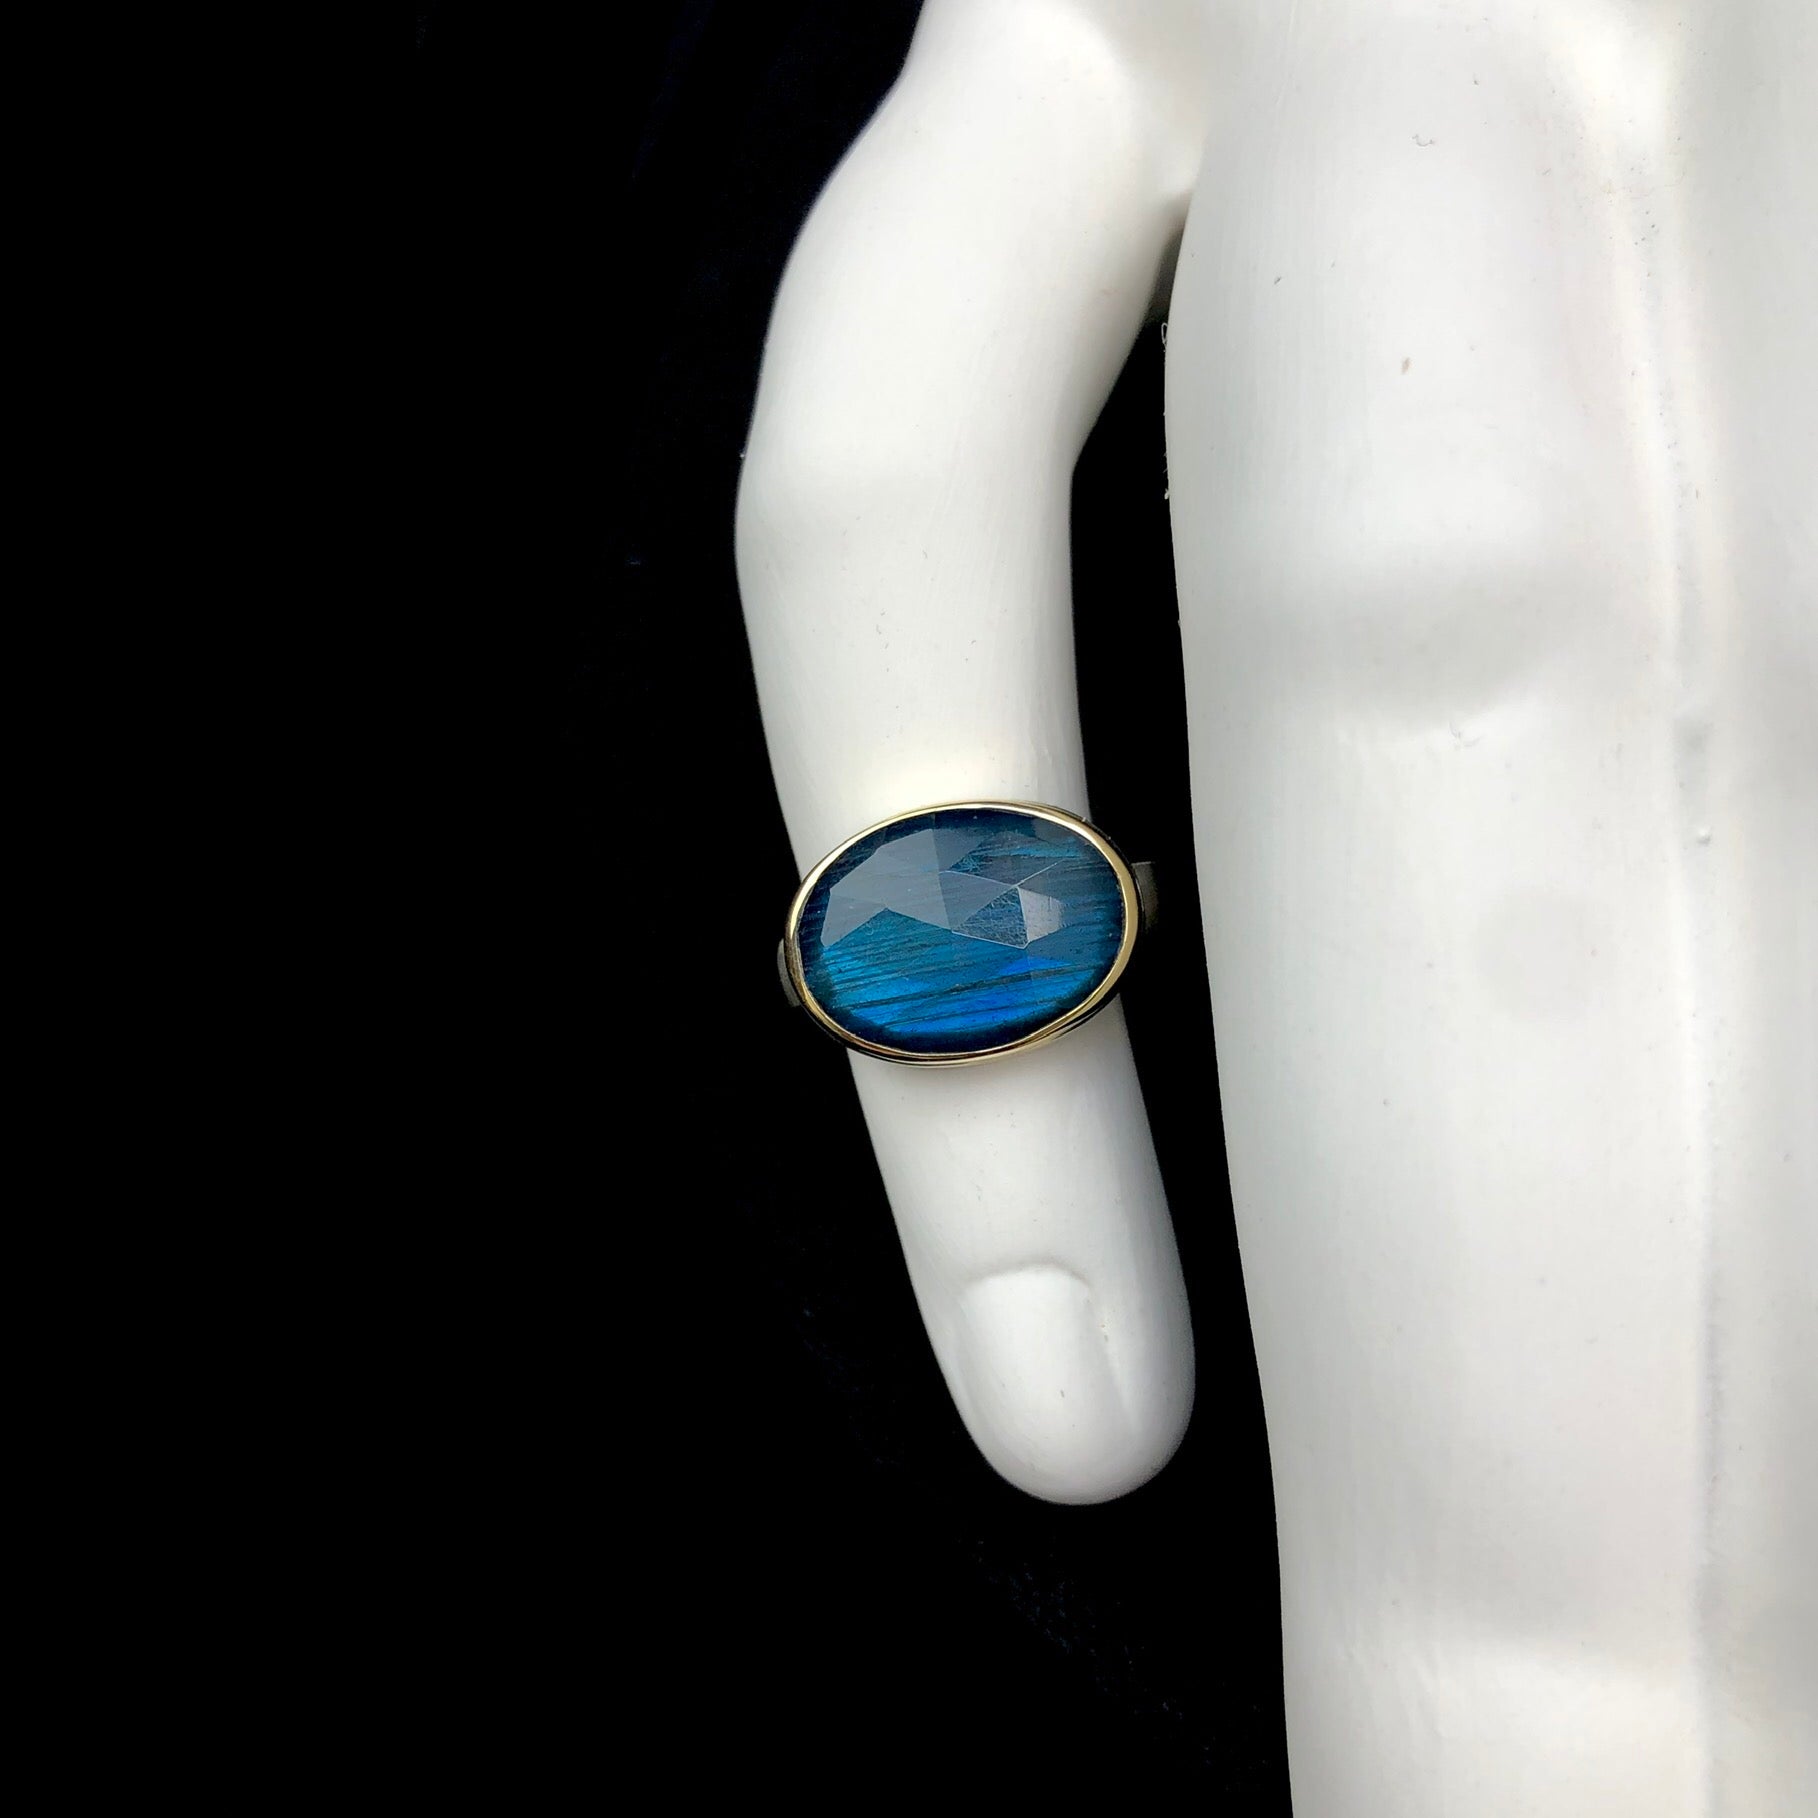 Front view of iridescent blueish green labradorite stone ring shown on white ceramic finger